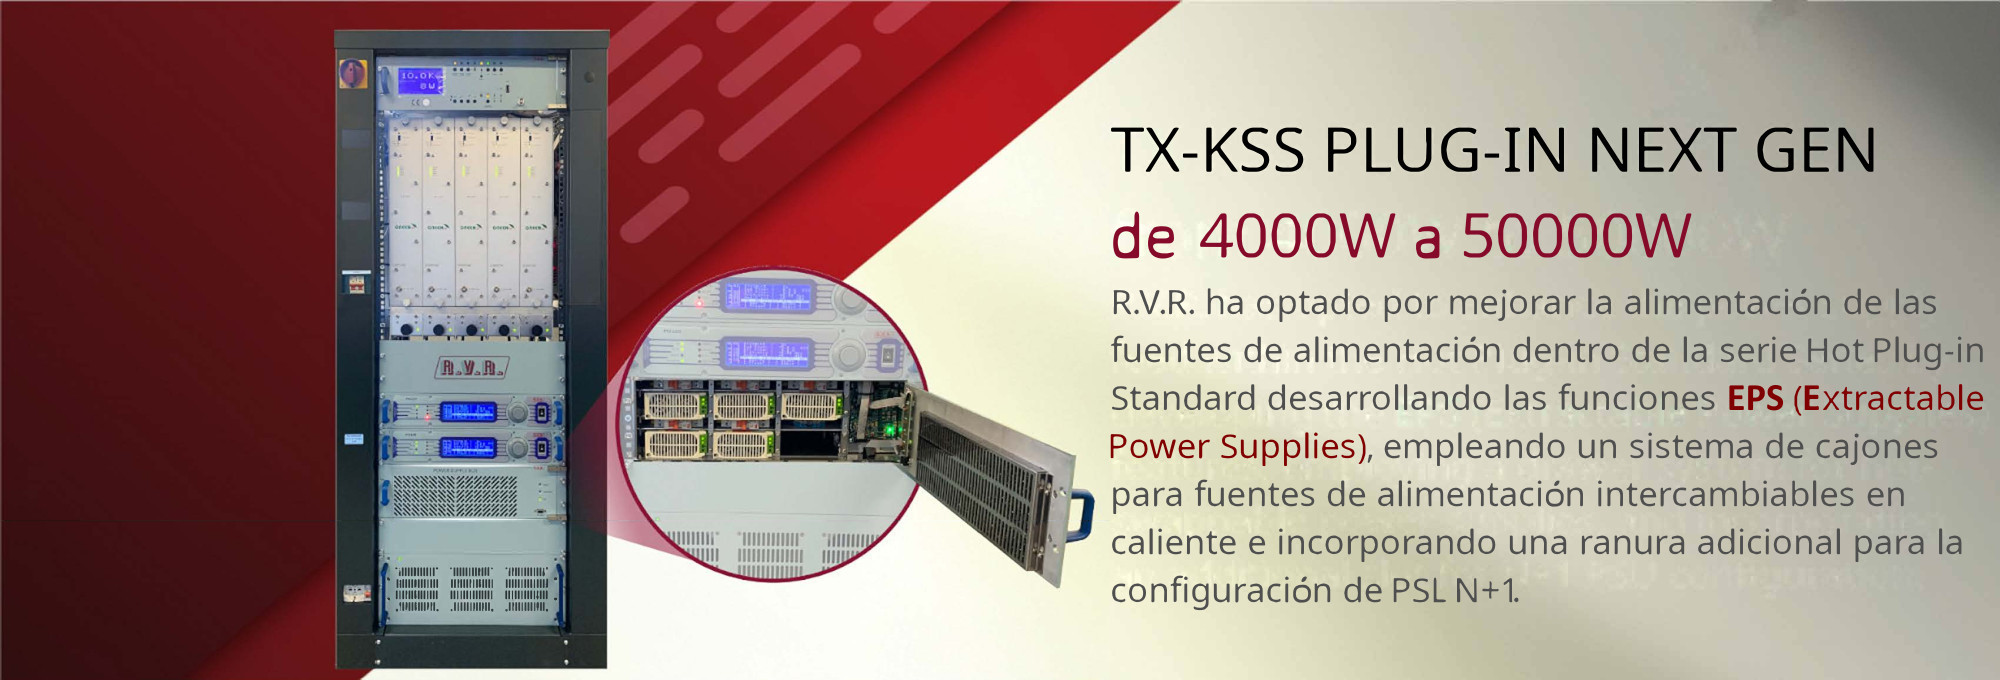 https://www.rvr.it/es/products/scalable-trasmitters/ts-kss-next-generatione-series/